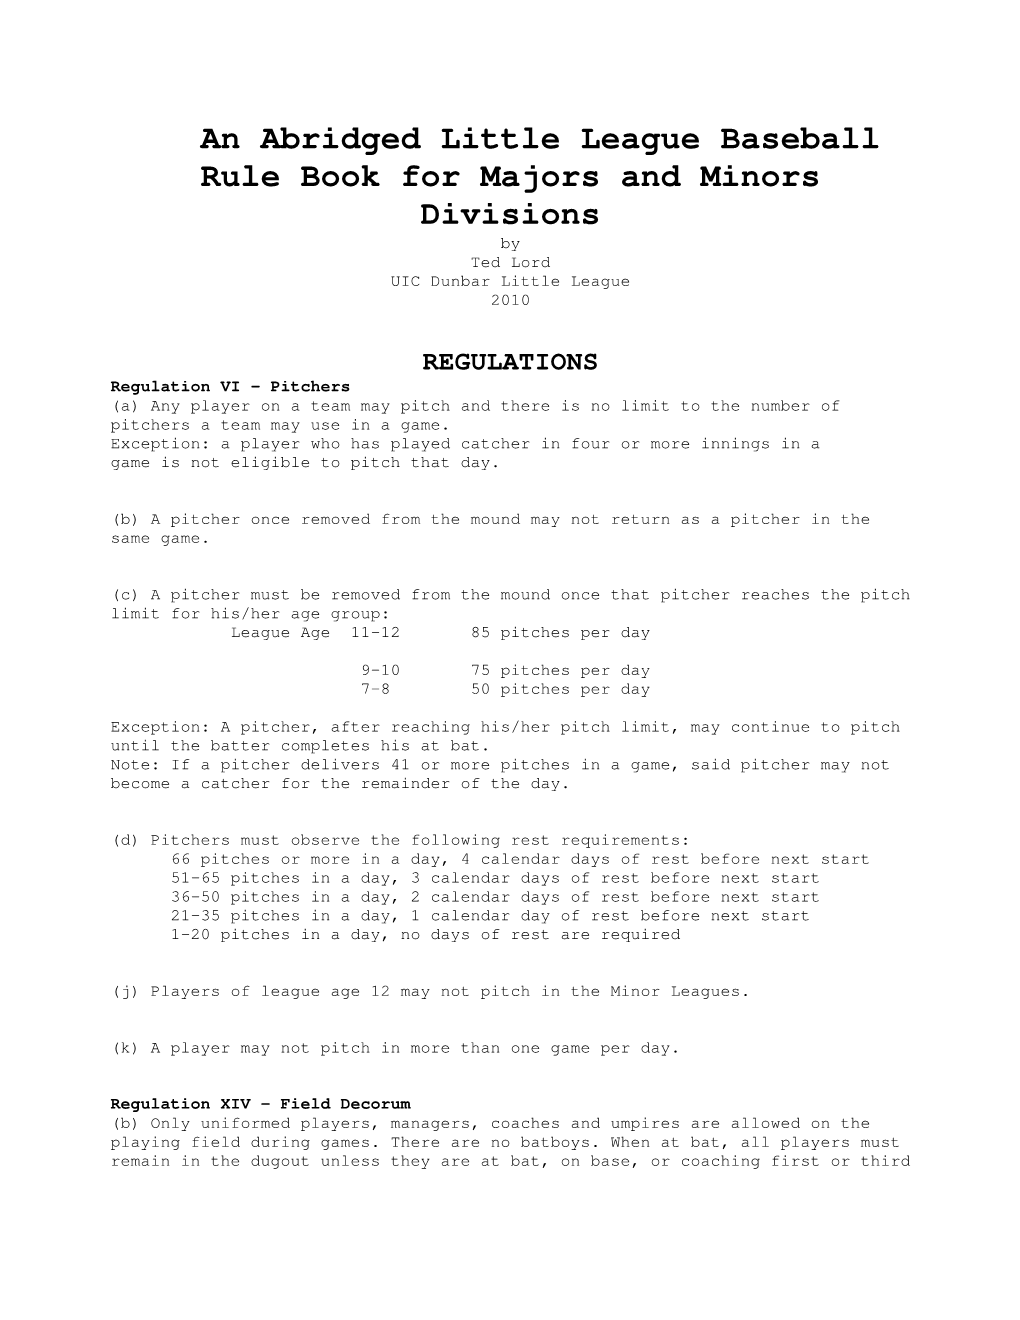 An Abridged Little League Baseball Rule Book for Majors and Minors Divisions by Ted Lord UIC Dunbar Little League 2010